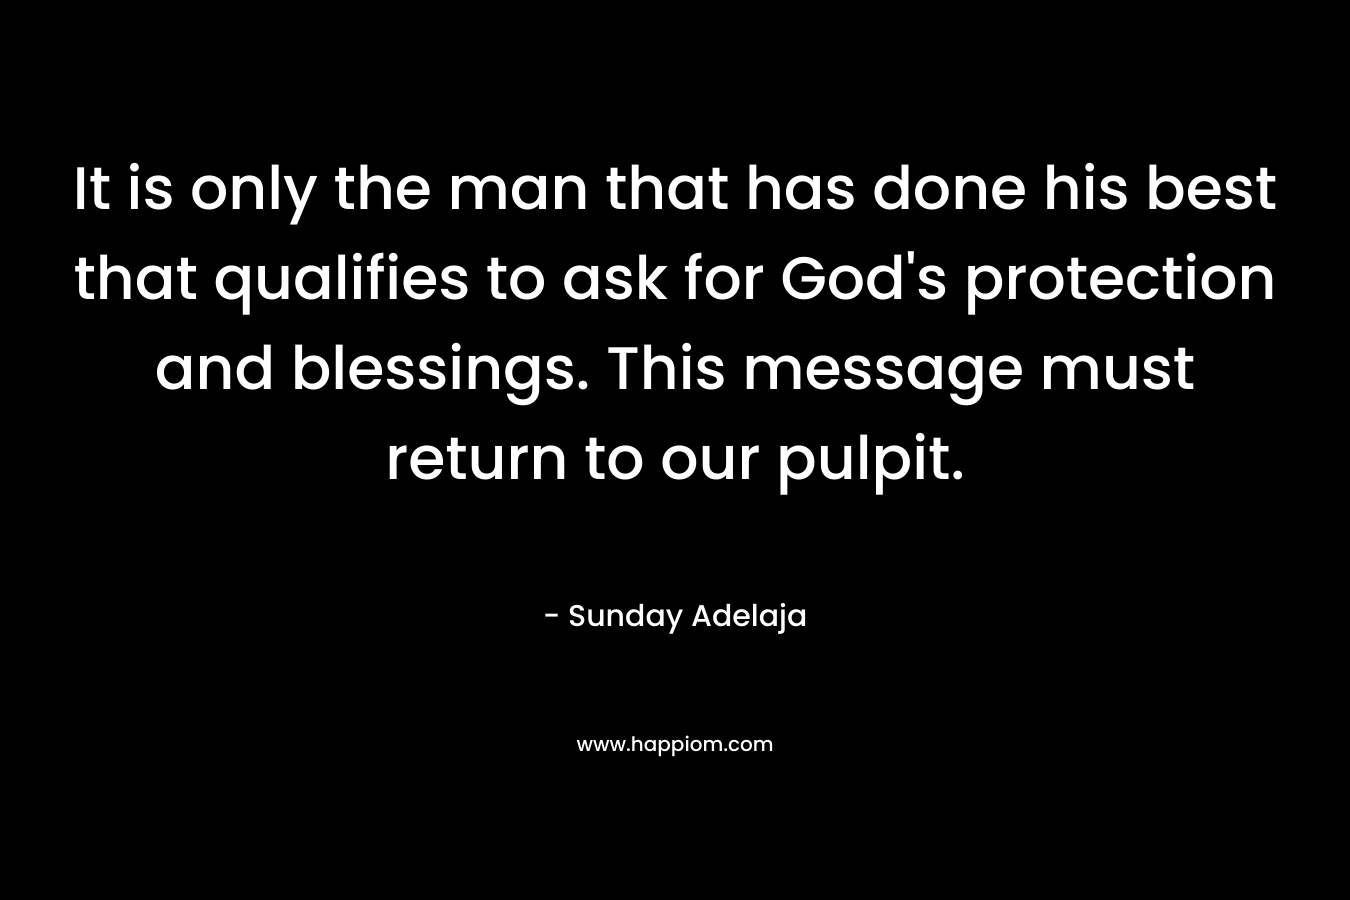 It is only the man that has done his best that qualifies to ask for God's protection and blessings. This message must return to our pulpit.